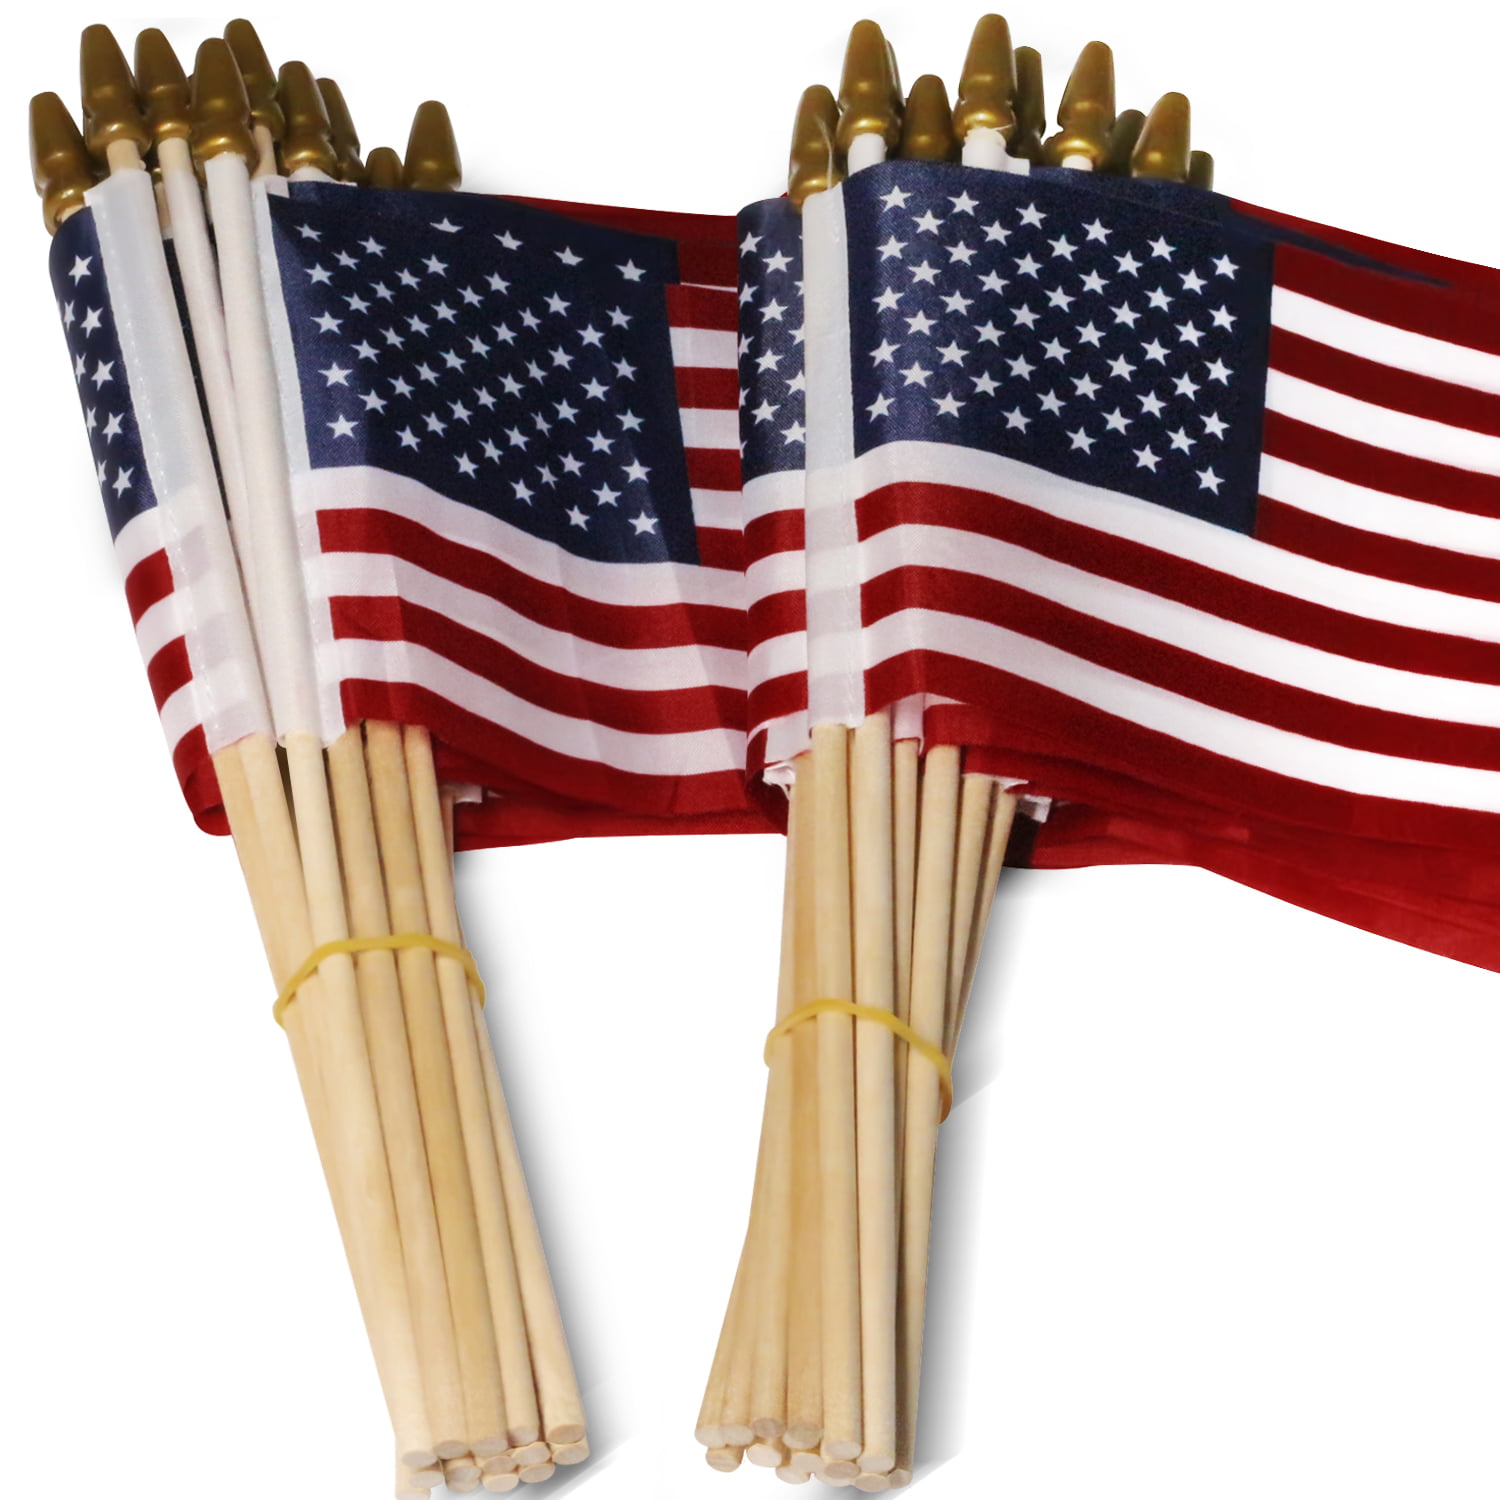 36Pack Handheld Small American Flags And Sticks With Round Top Wooden Handle 